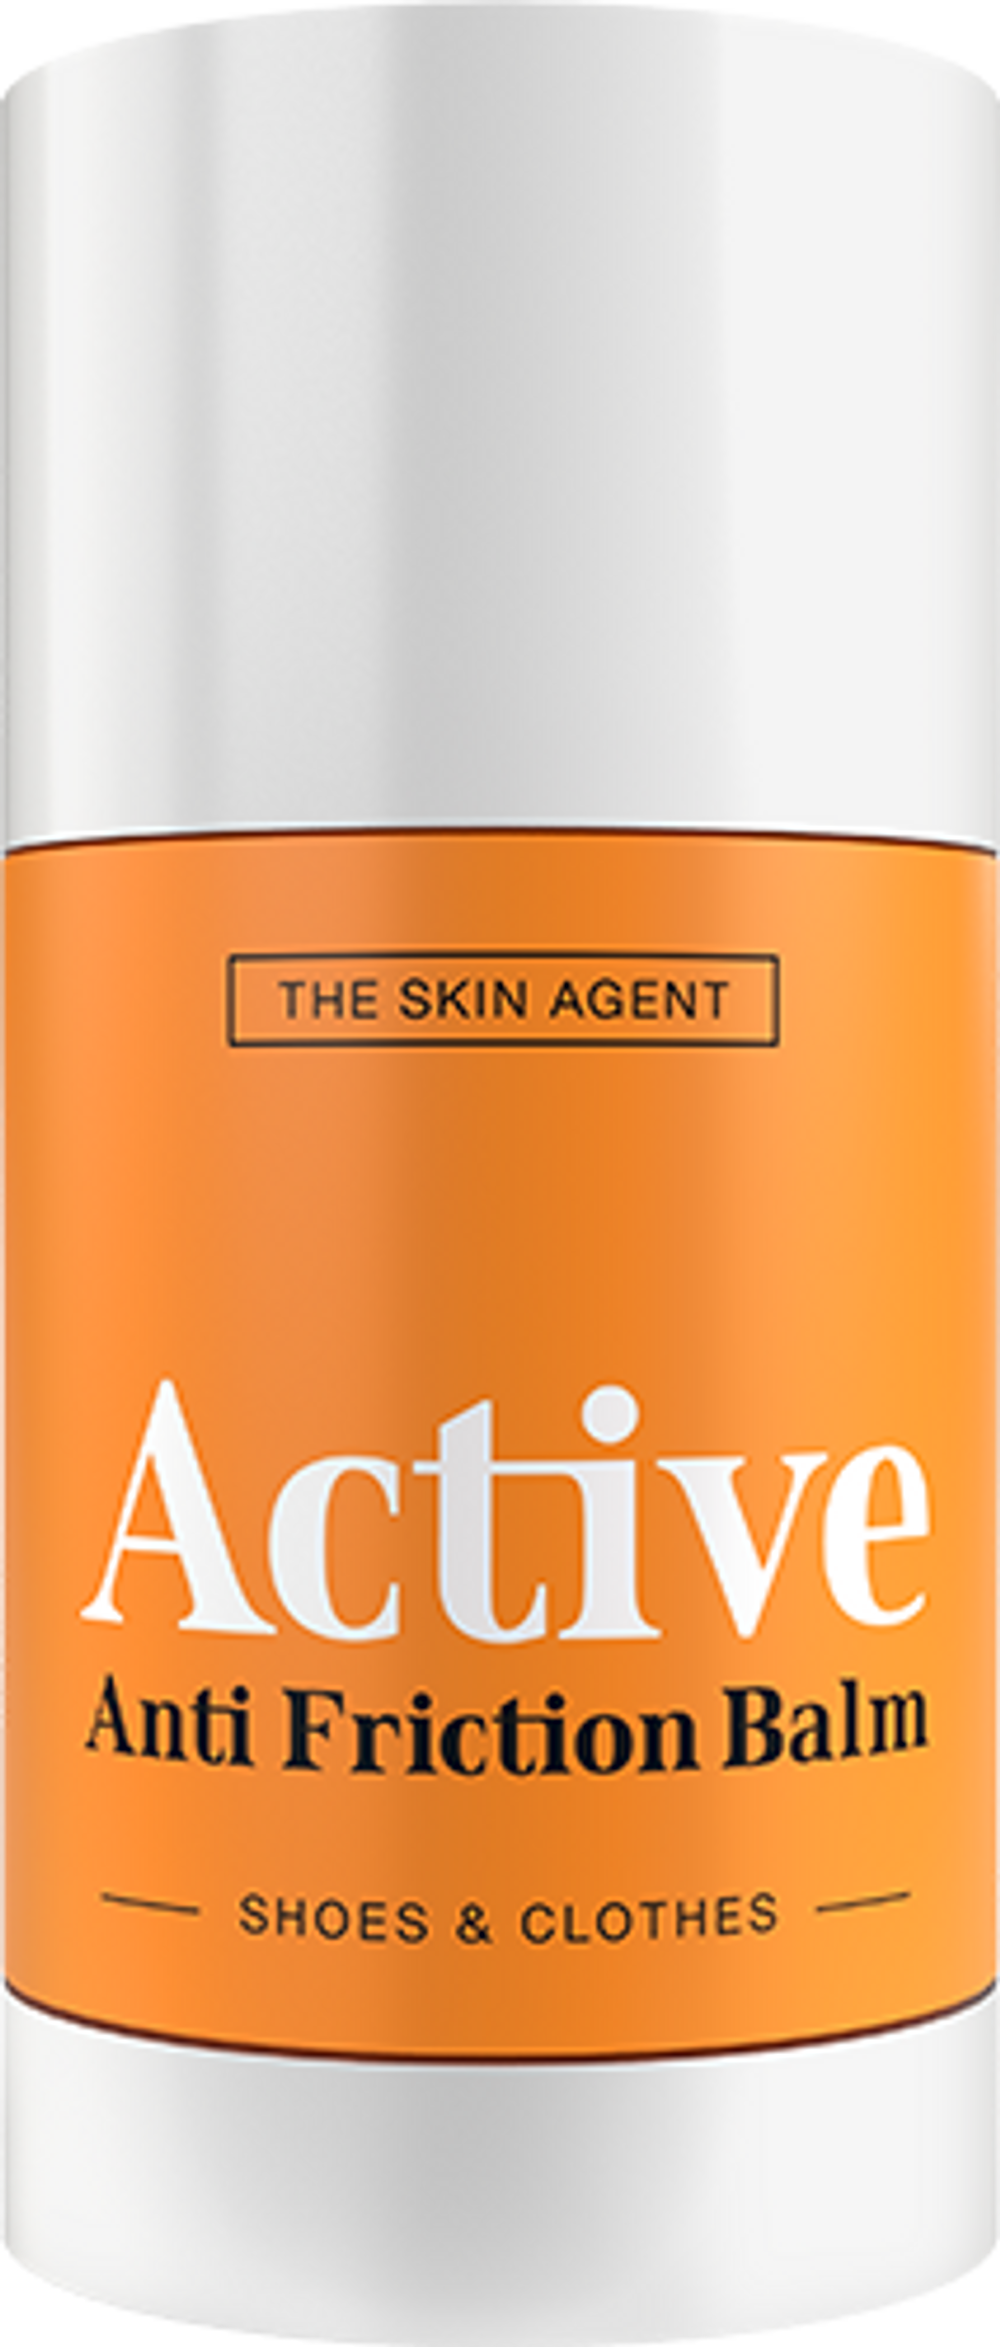 Active Anti Friction Balm 75 ml from The Skin Agent 
Isolated product image